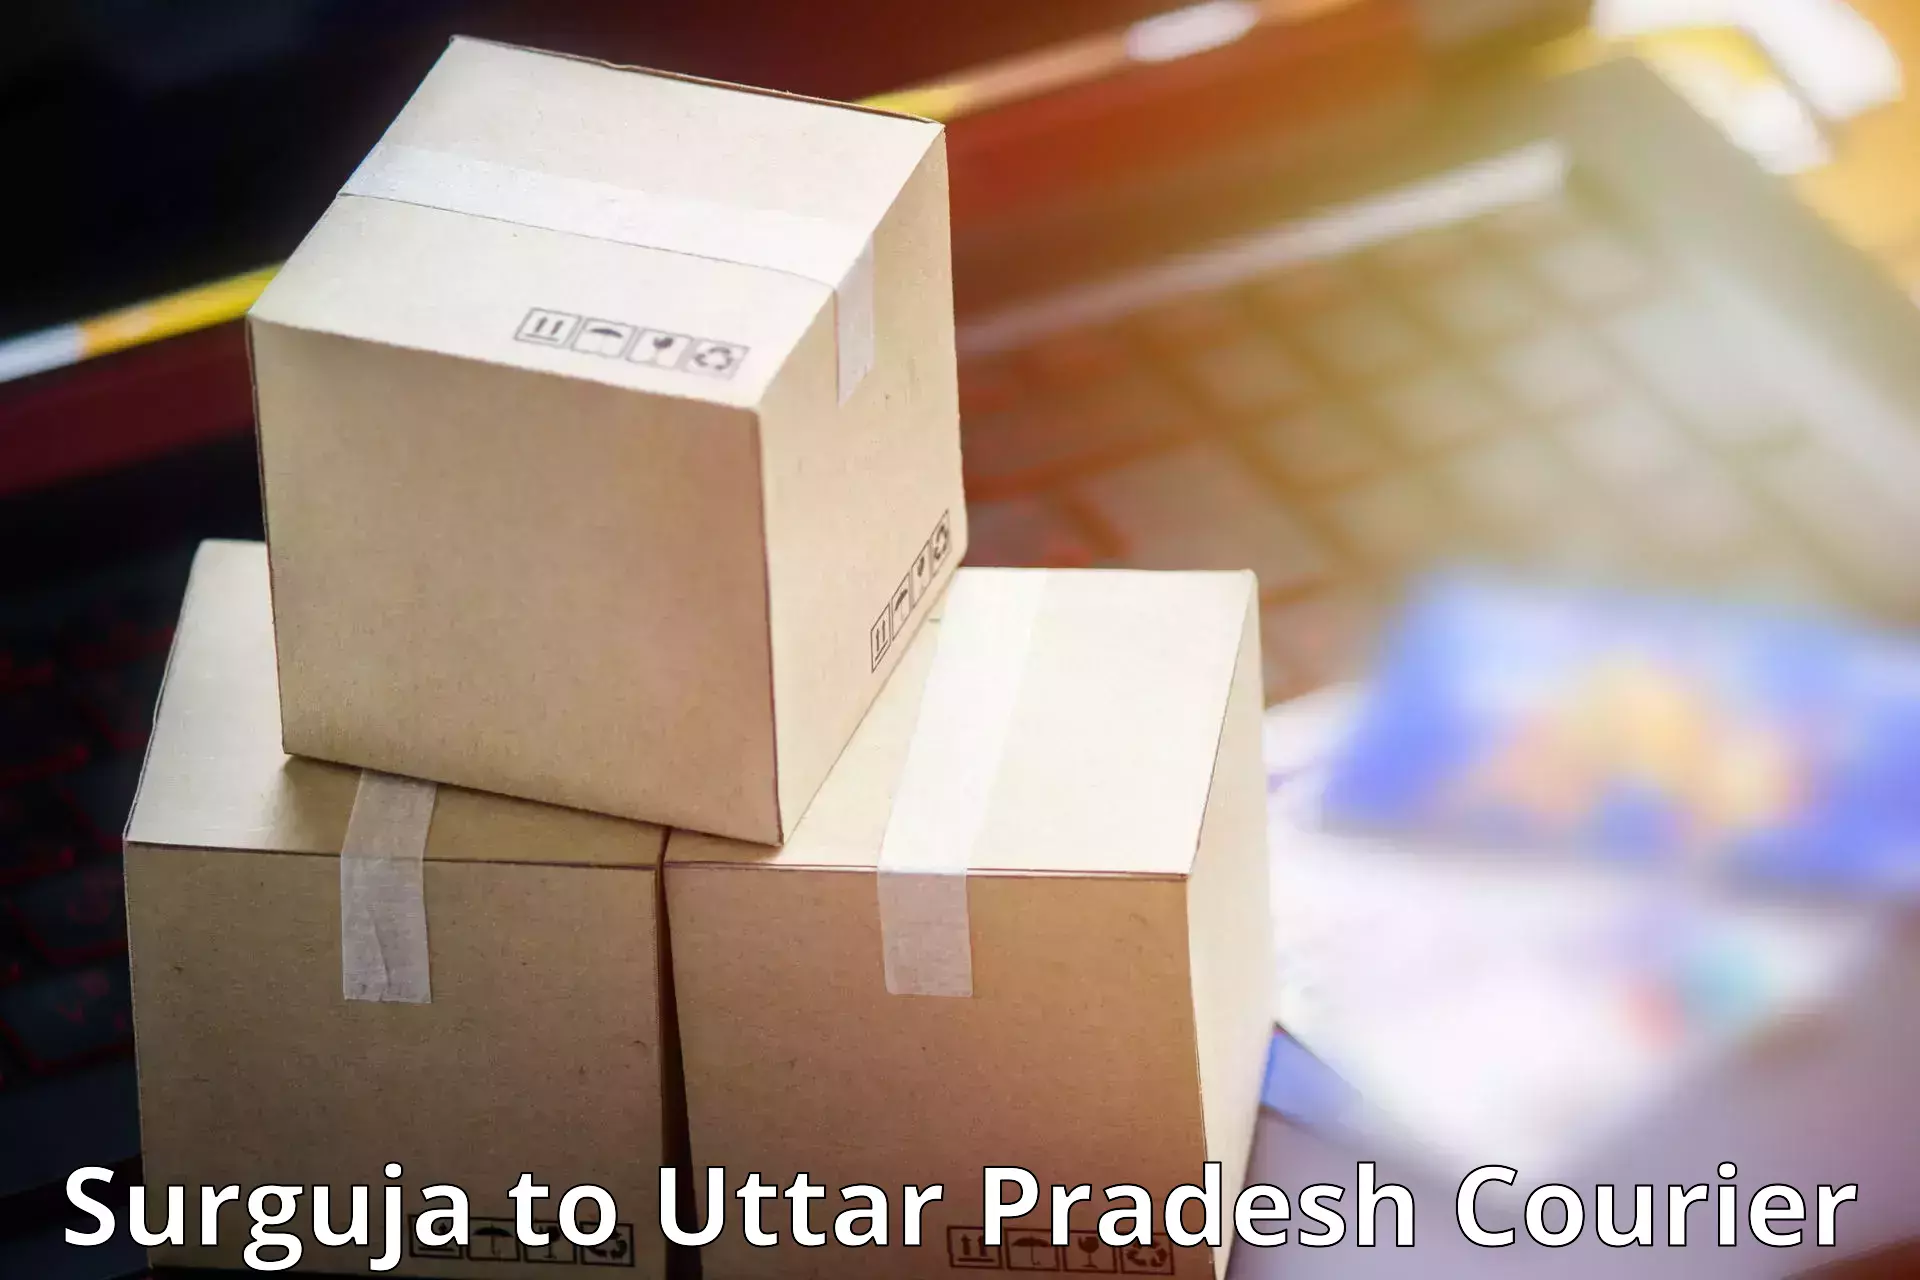 Online package tracking Surguja to Sonbhadra